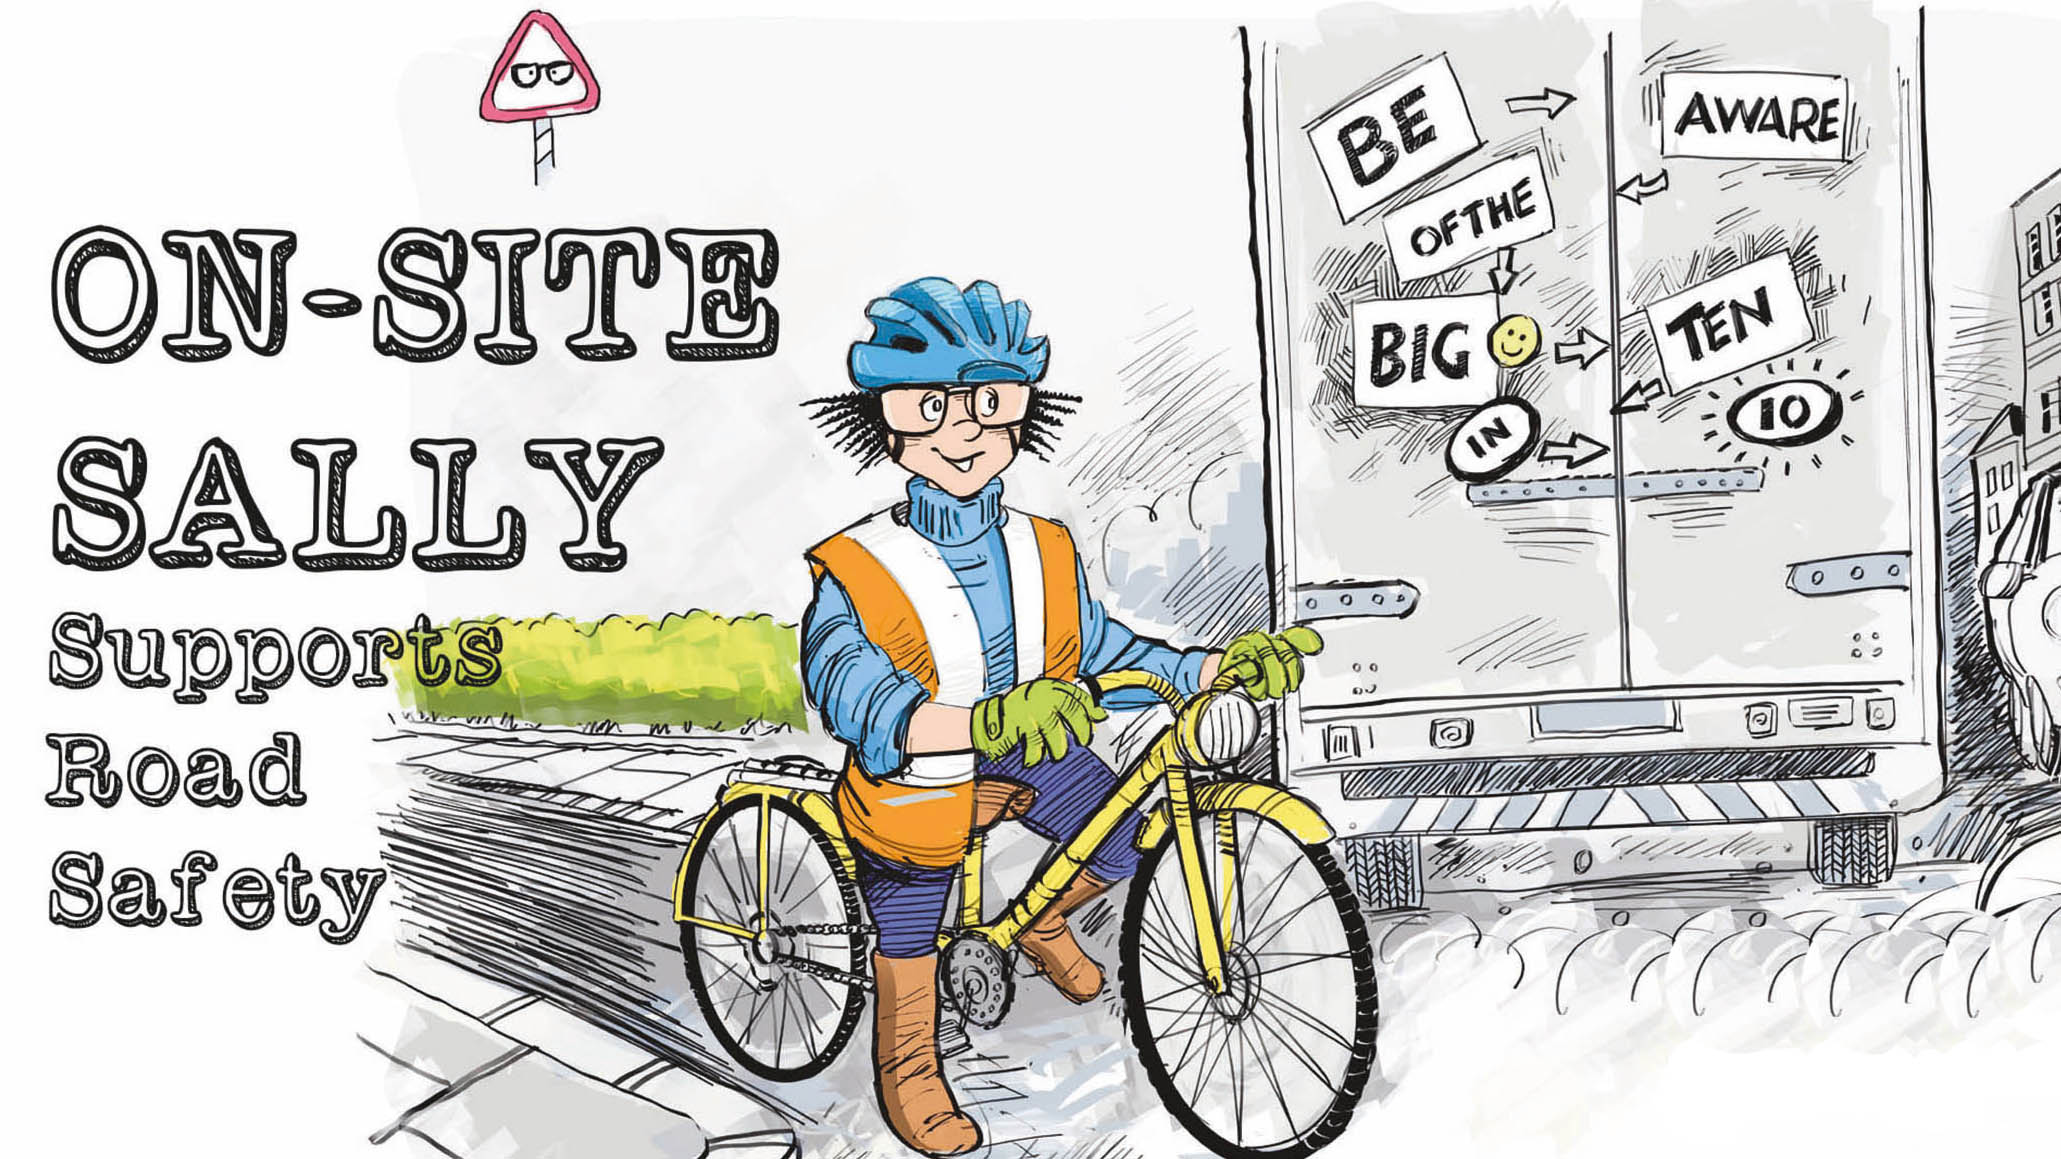 On-site Sally road safety